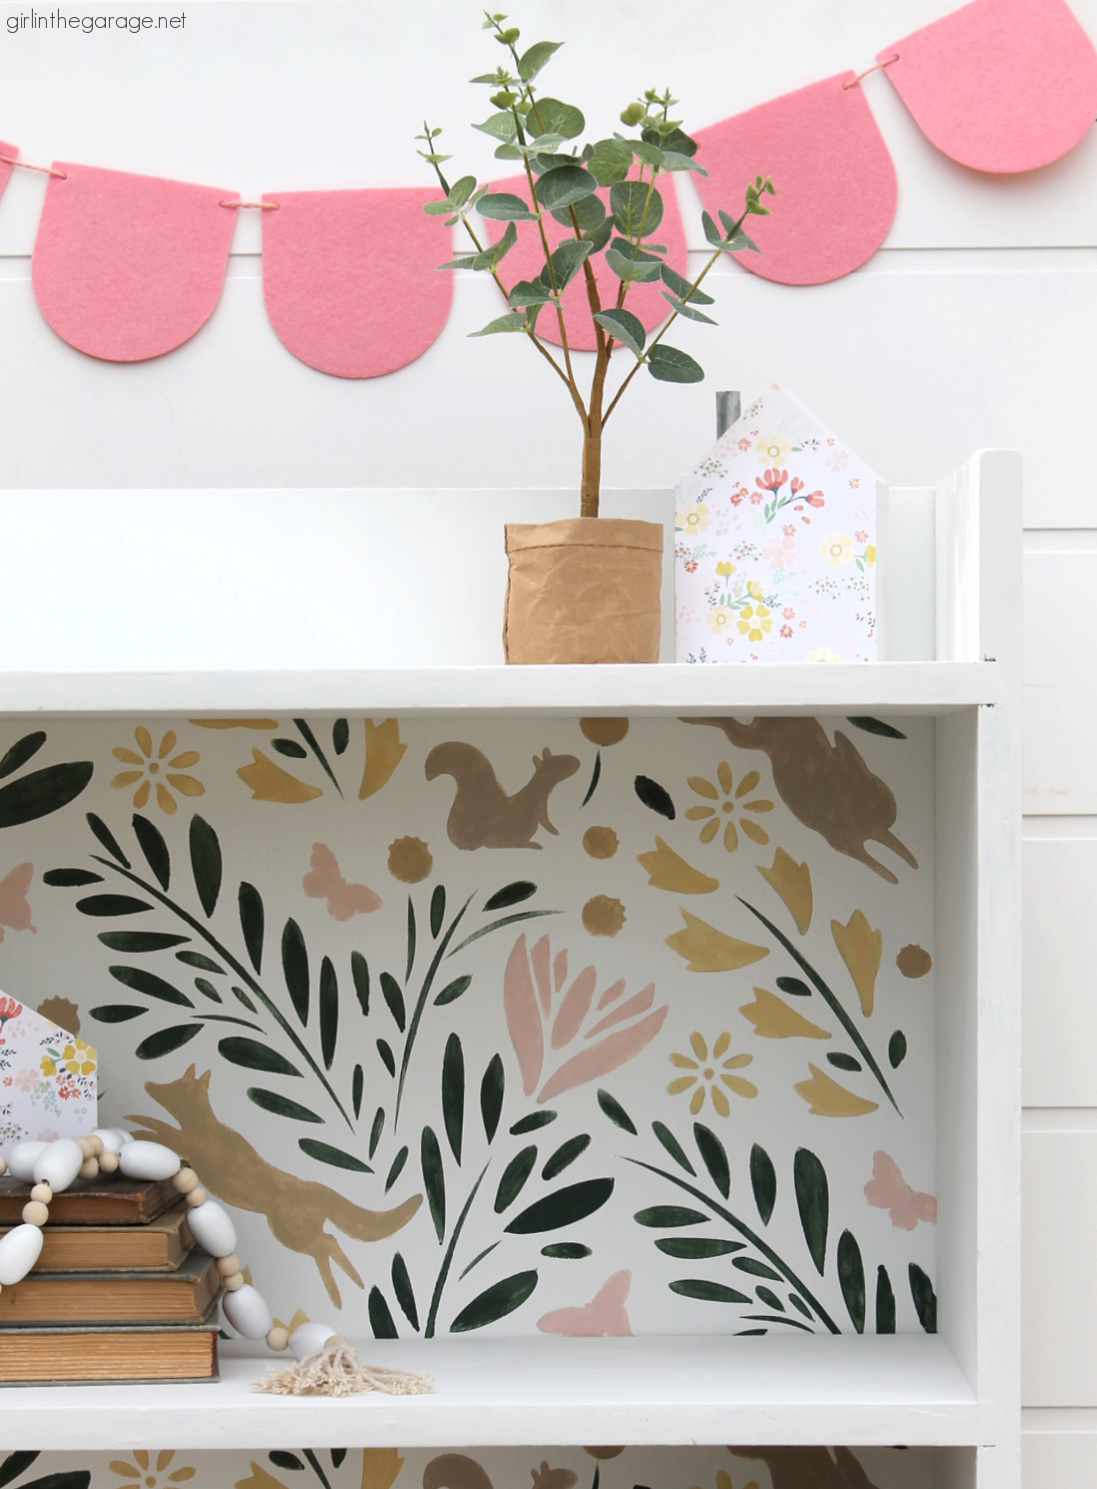 How to paint a bookcase white and add a whimsical stencil in multiple Country Chic Paint colors for a fun and unique furniture idea. By Girl in the Garage